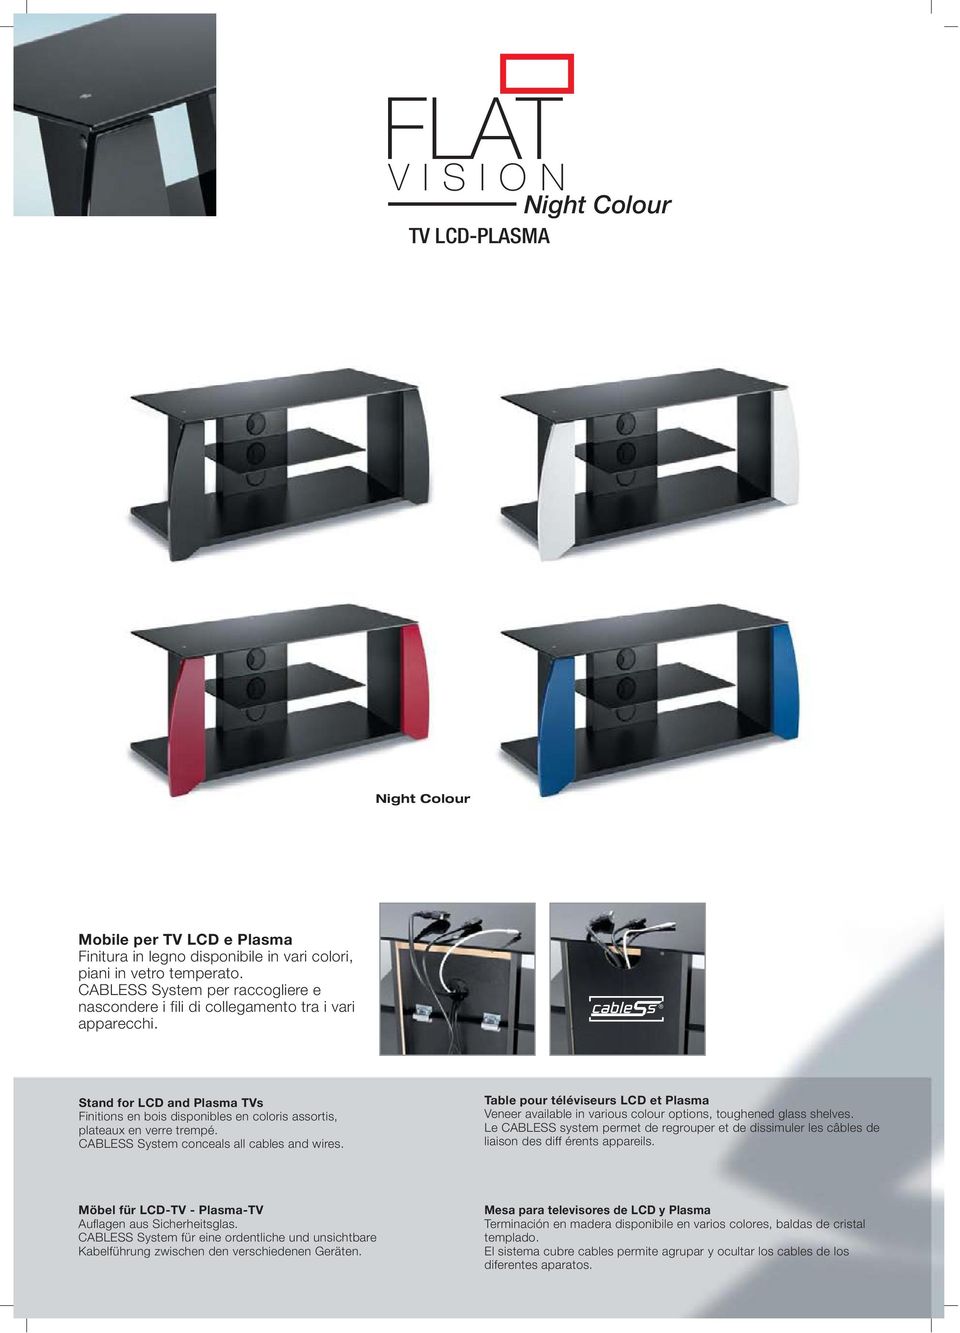 CABLESS System conceals all cables and wires. Table pour téléviseurs LCD et Plasma Veneer available in various colour options, toughened glass shelves.